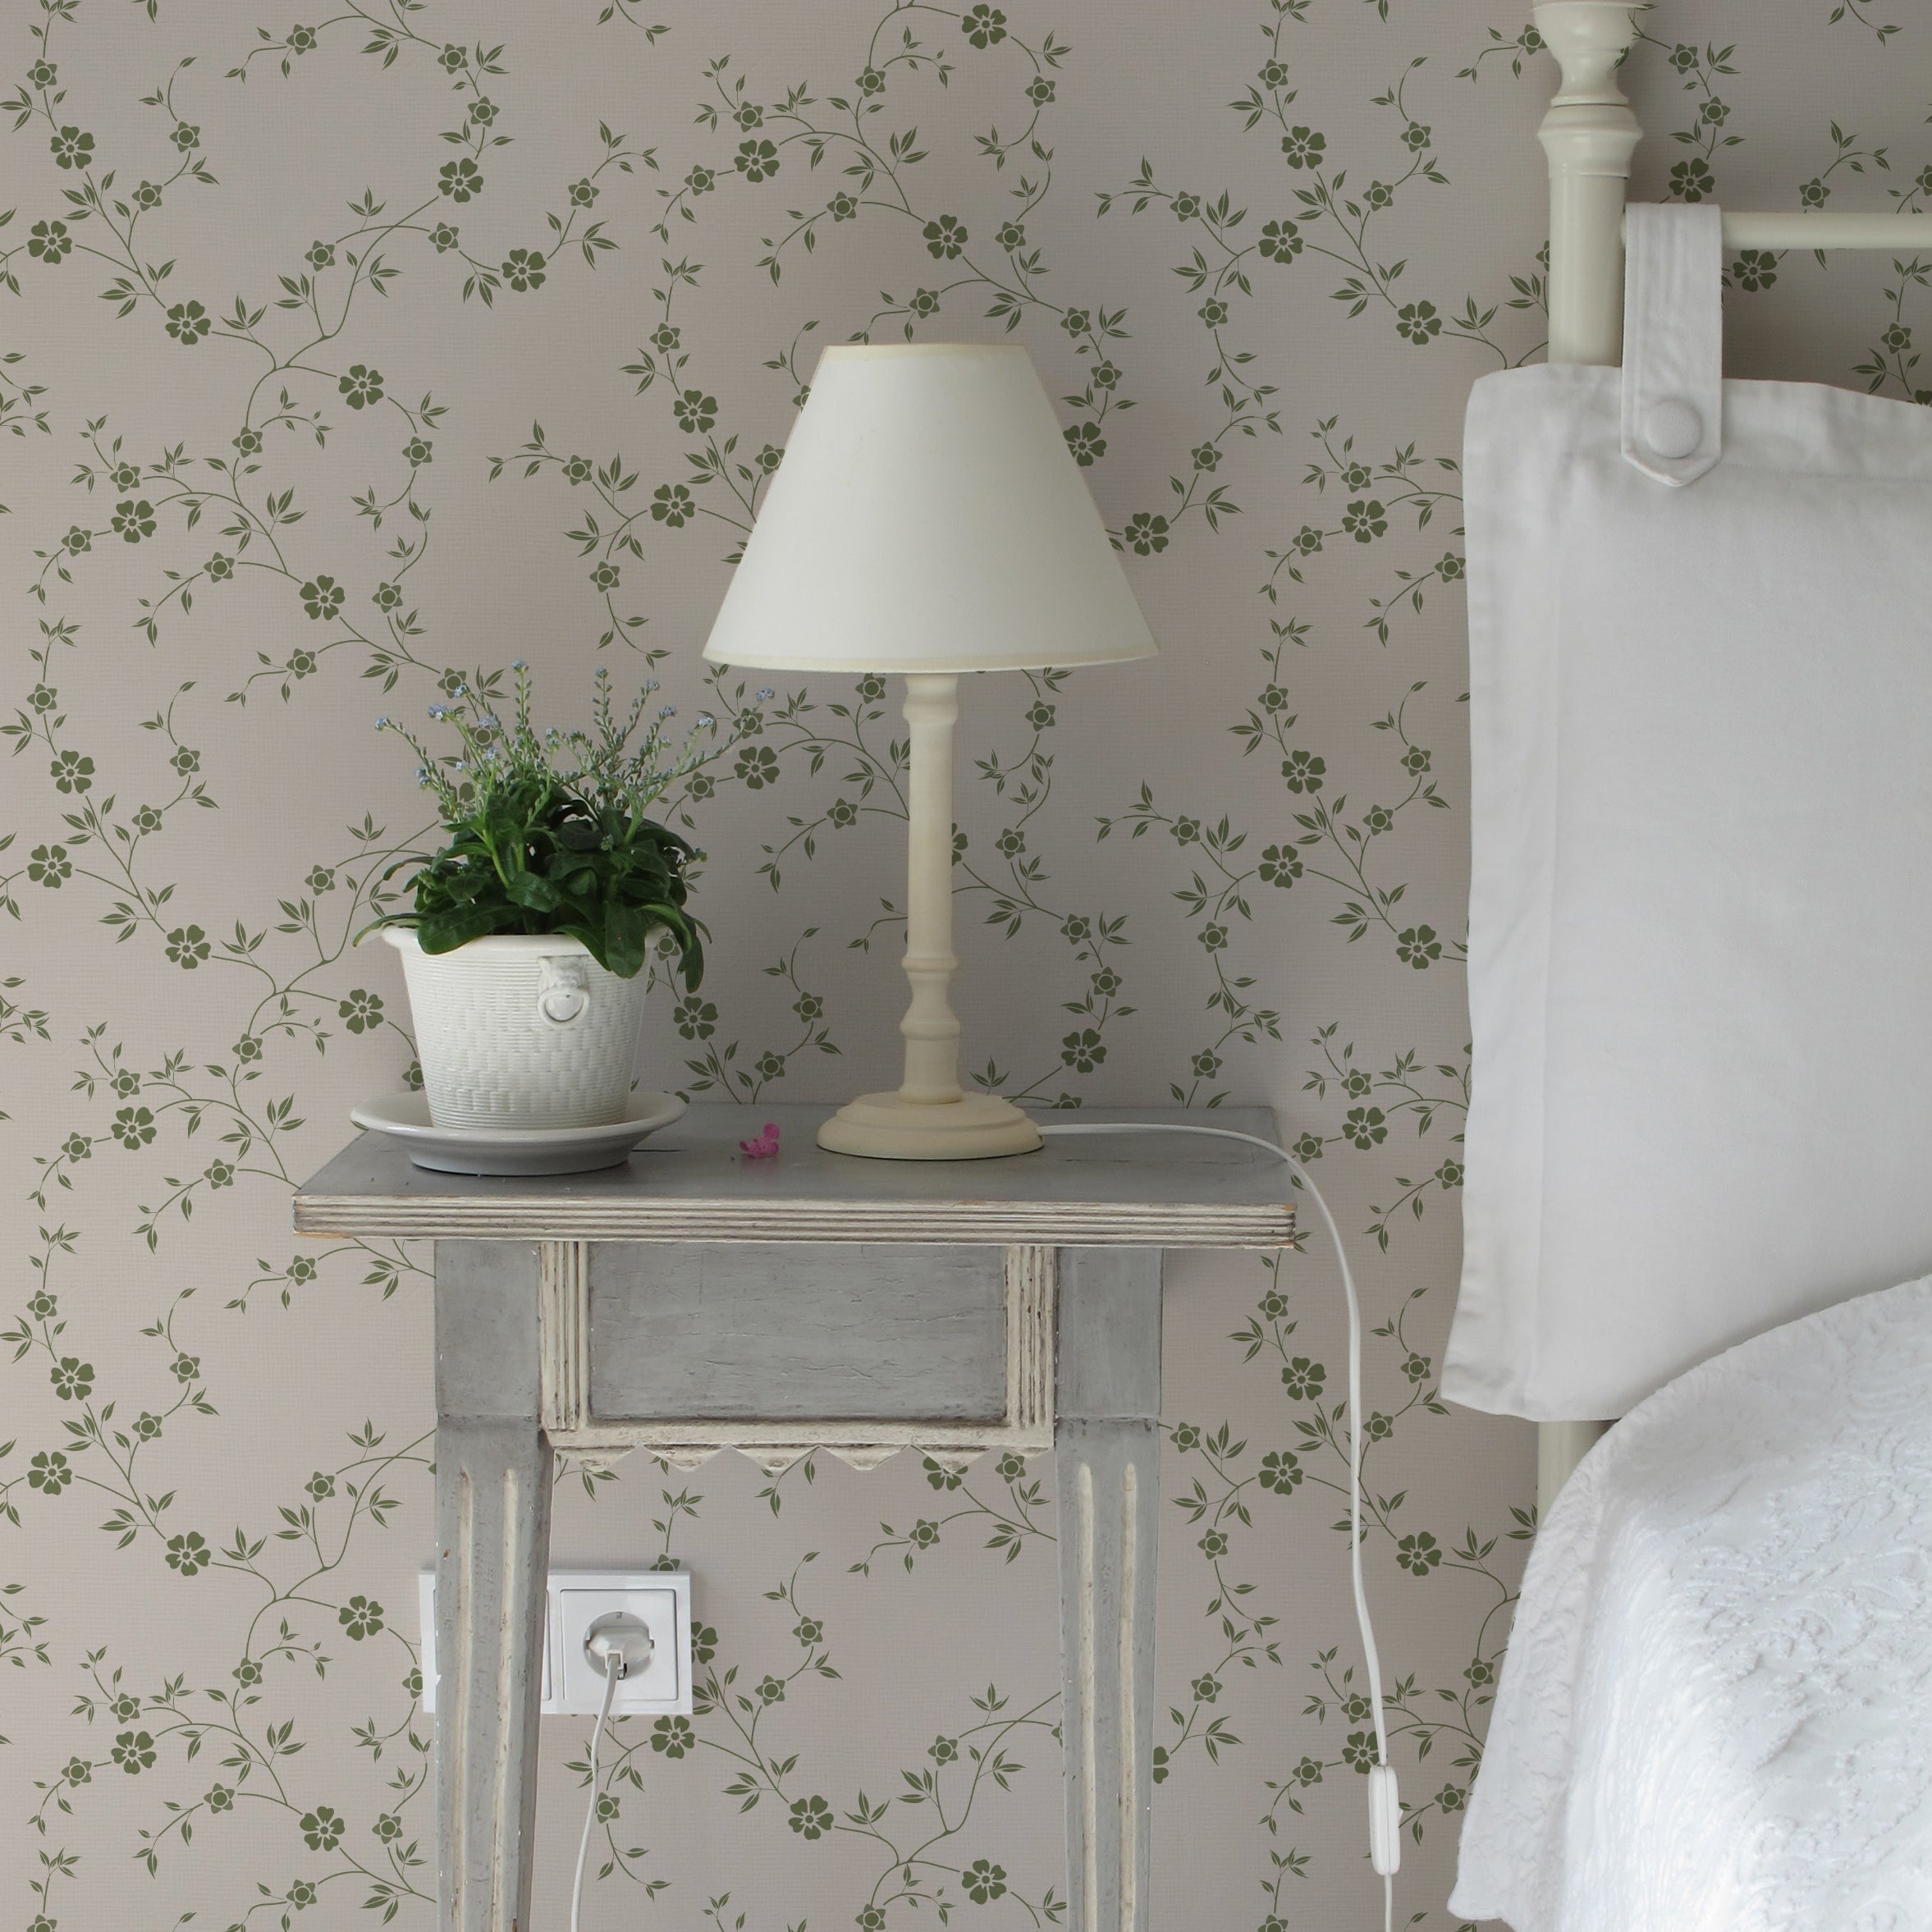 A cozy bedroom corner where the Charming Floral Wallpaper-Moss creates a relaxing ambiance. A distressed wooden side table holds a classic lamp and a potted green plant, complementing the natural theme alongside a comfortable bed with plush white bedding.